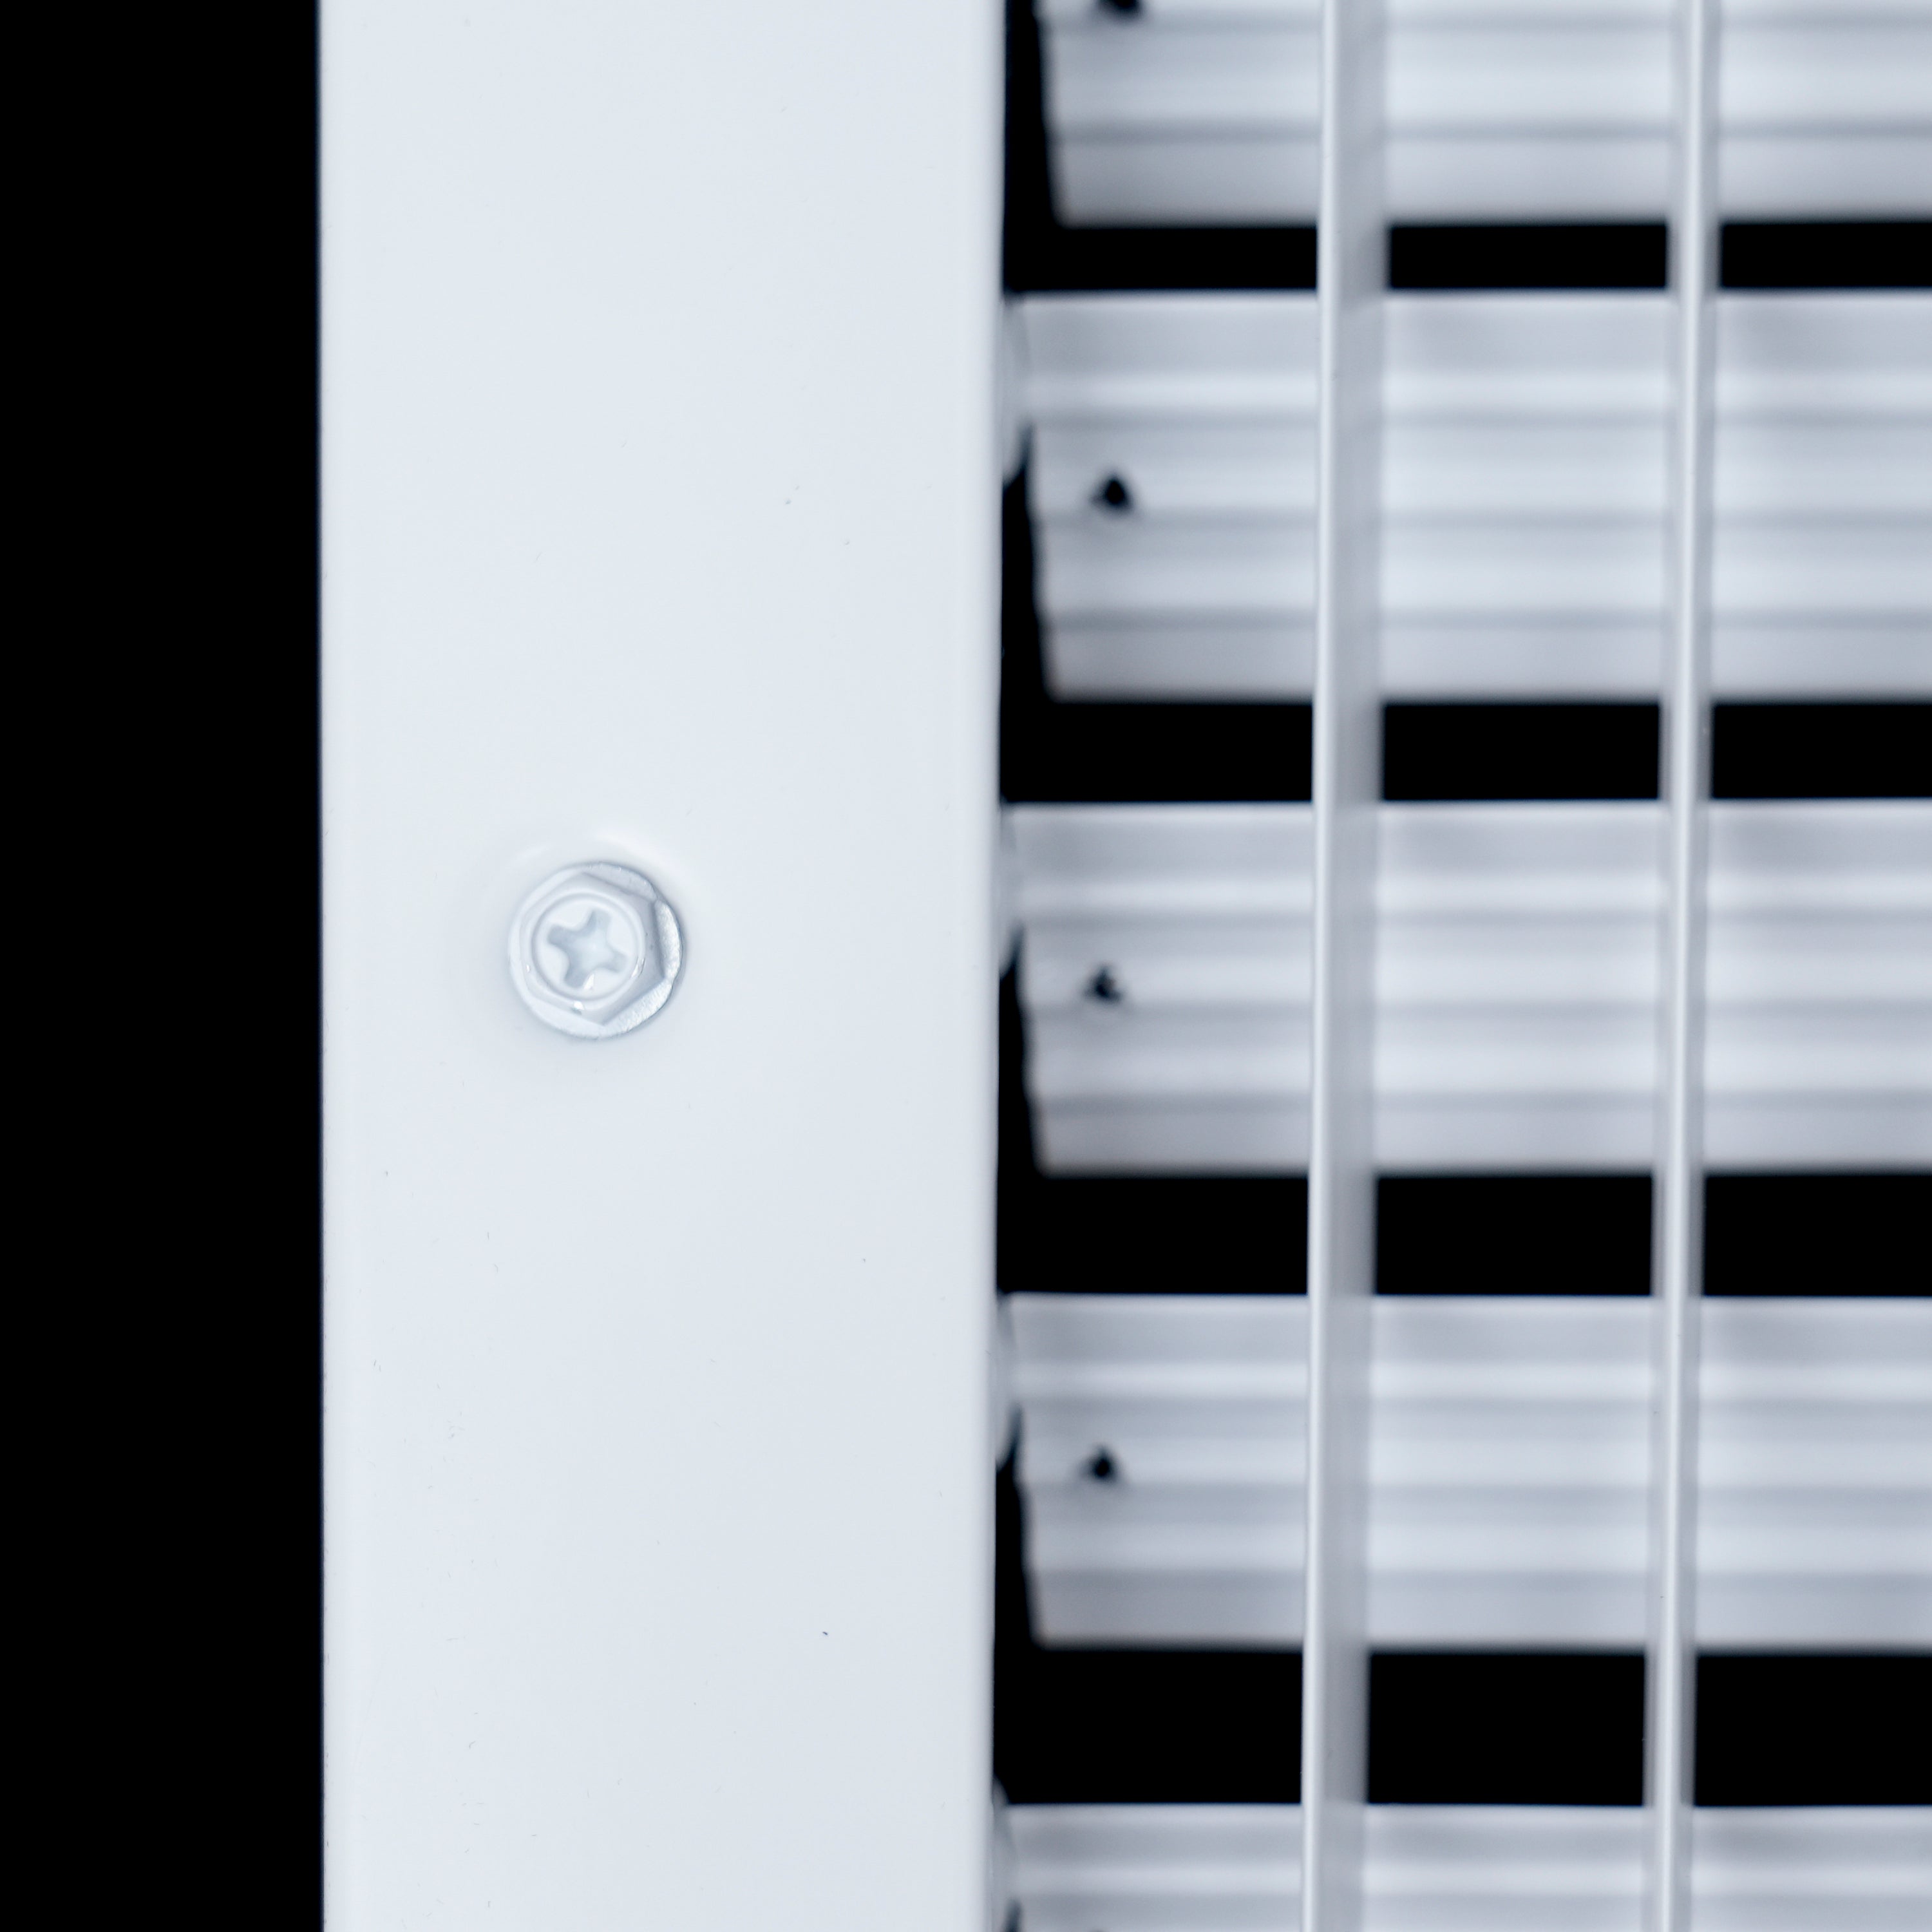 16"W x 4"H  Steel Adjustable Air Supply Grille | Register Vent Cover Grill for Sidewall and Ceiling | White | Outer Dimensions: 17.75"W X 5.75"H for 16x4 Duct Opening